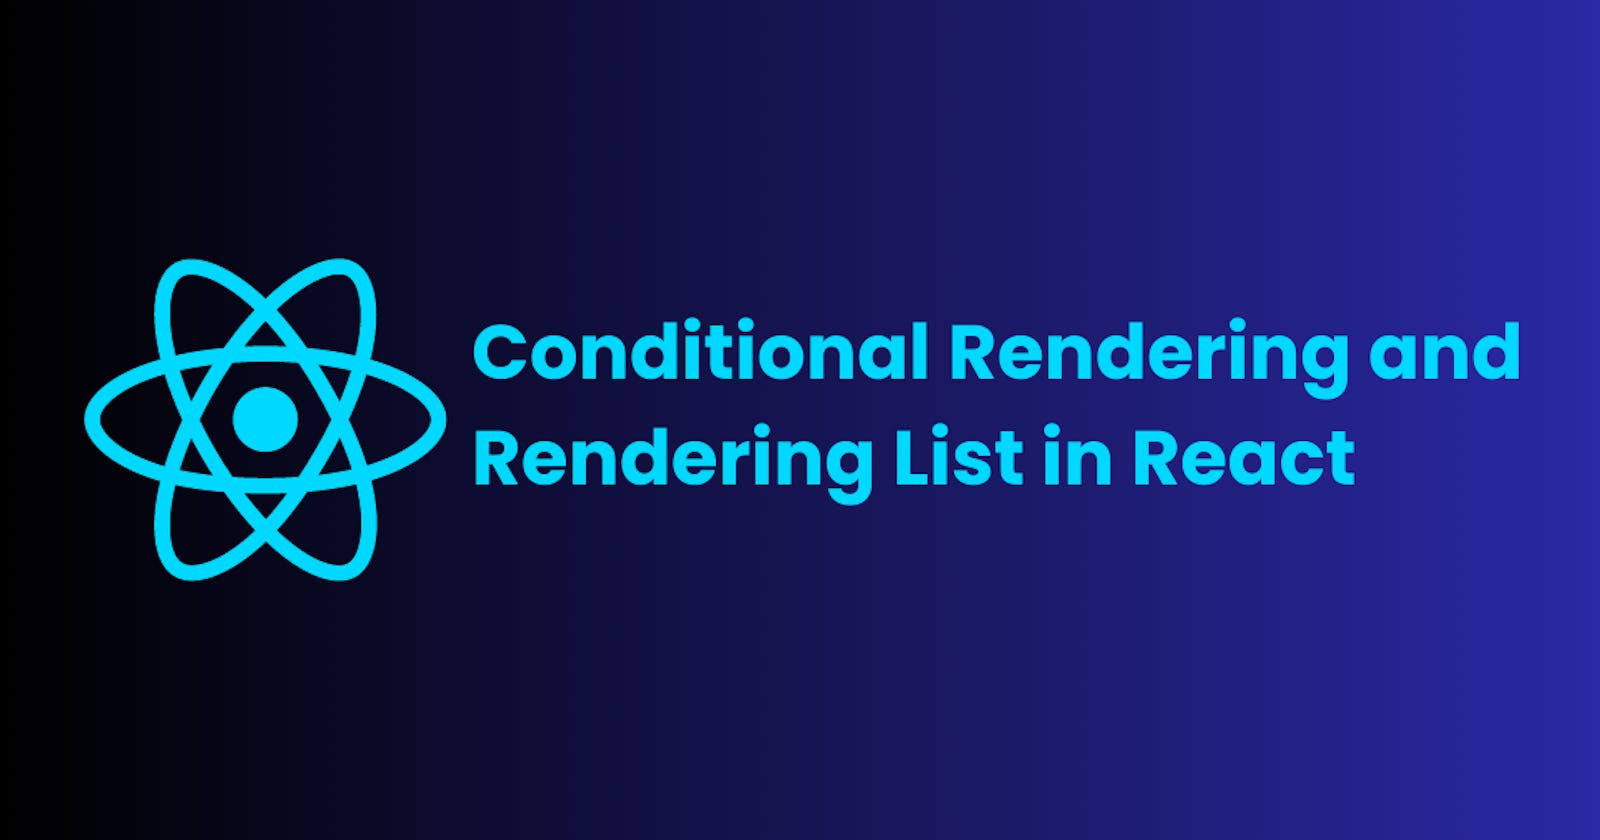 Conditional Rendering and Rendering List in React